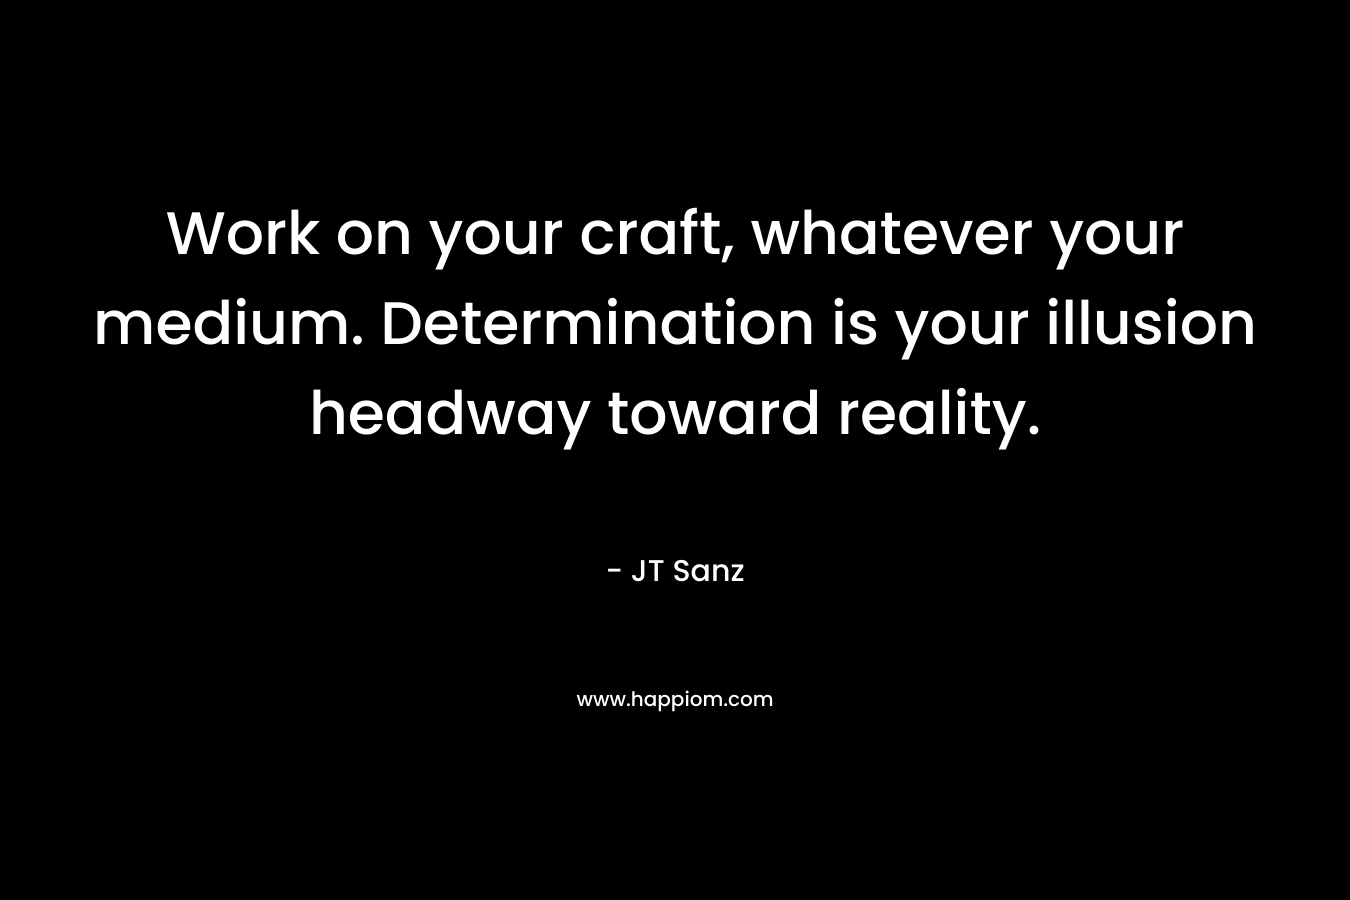 Work on your craft, whatever your medium. Determination is your illusion headway toward reality. – JT Sanz